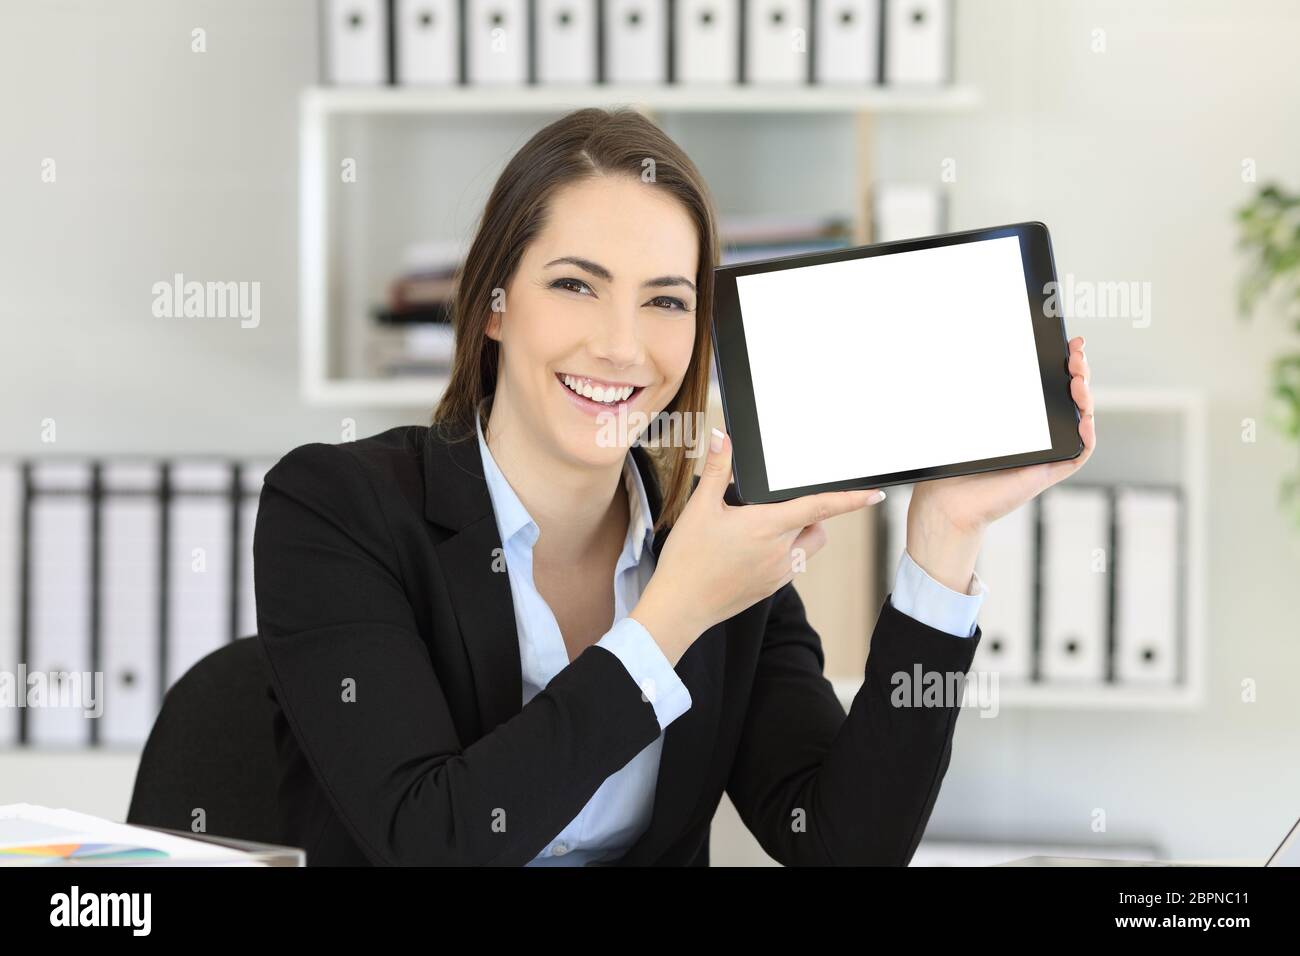 Happy office worker showing an horizontal tablet screen mock up Stock Photo